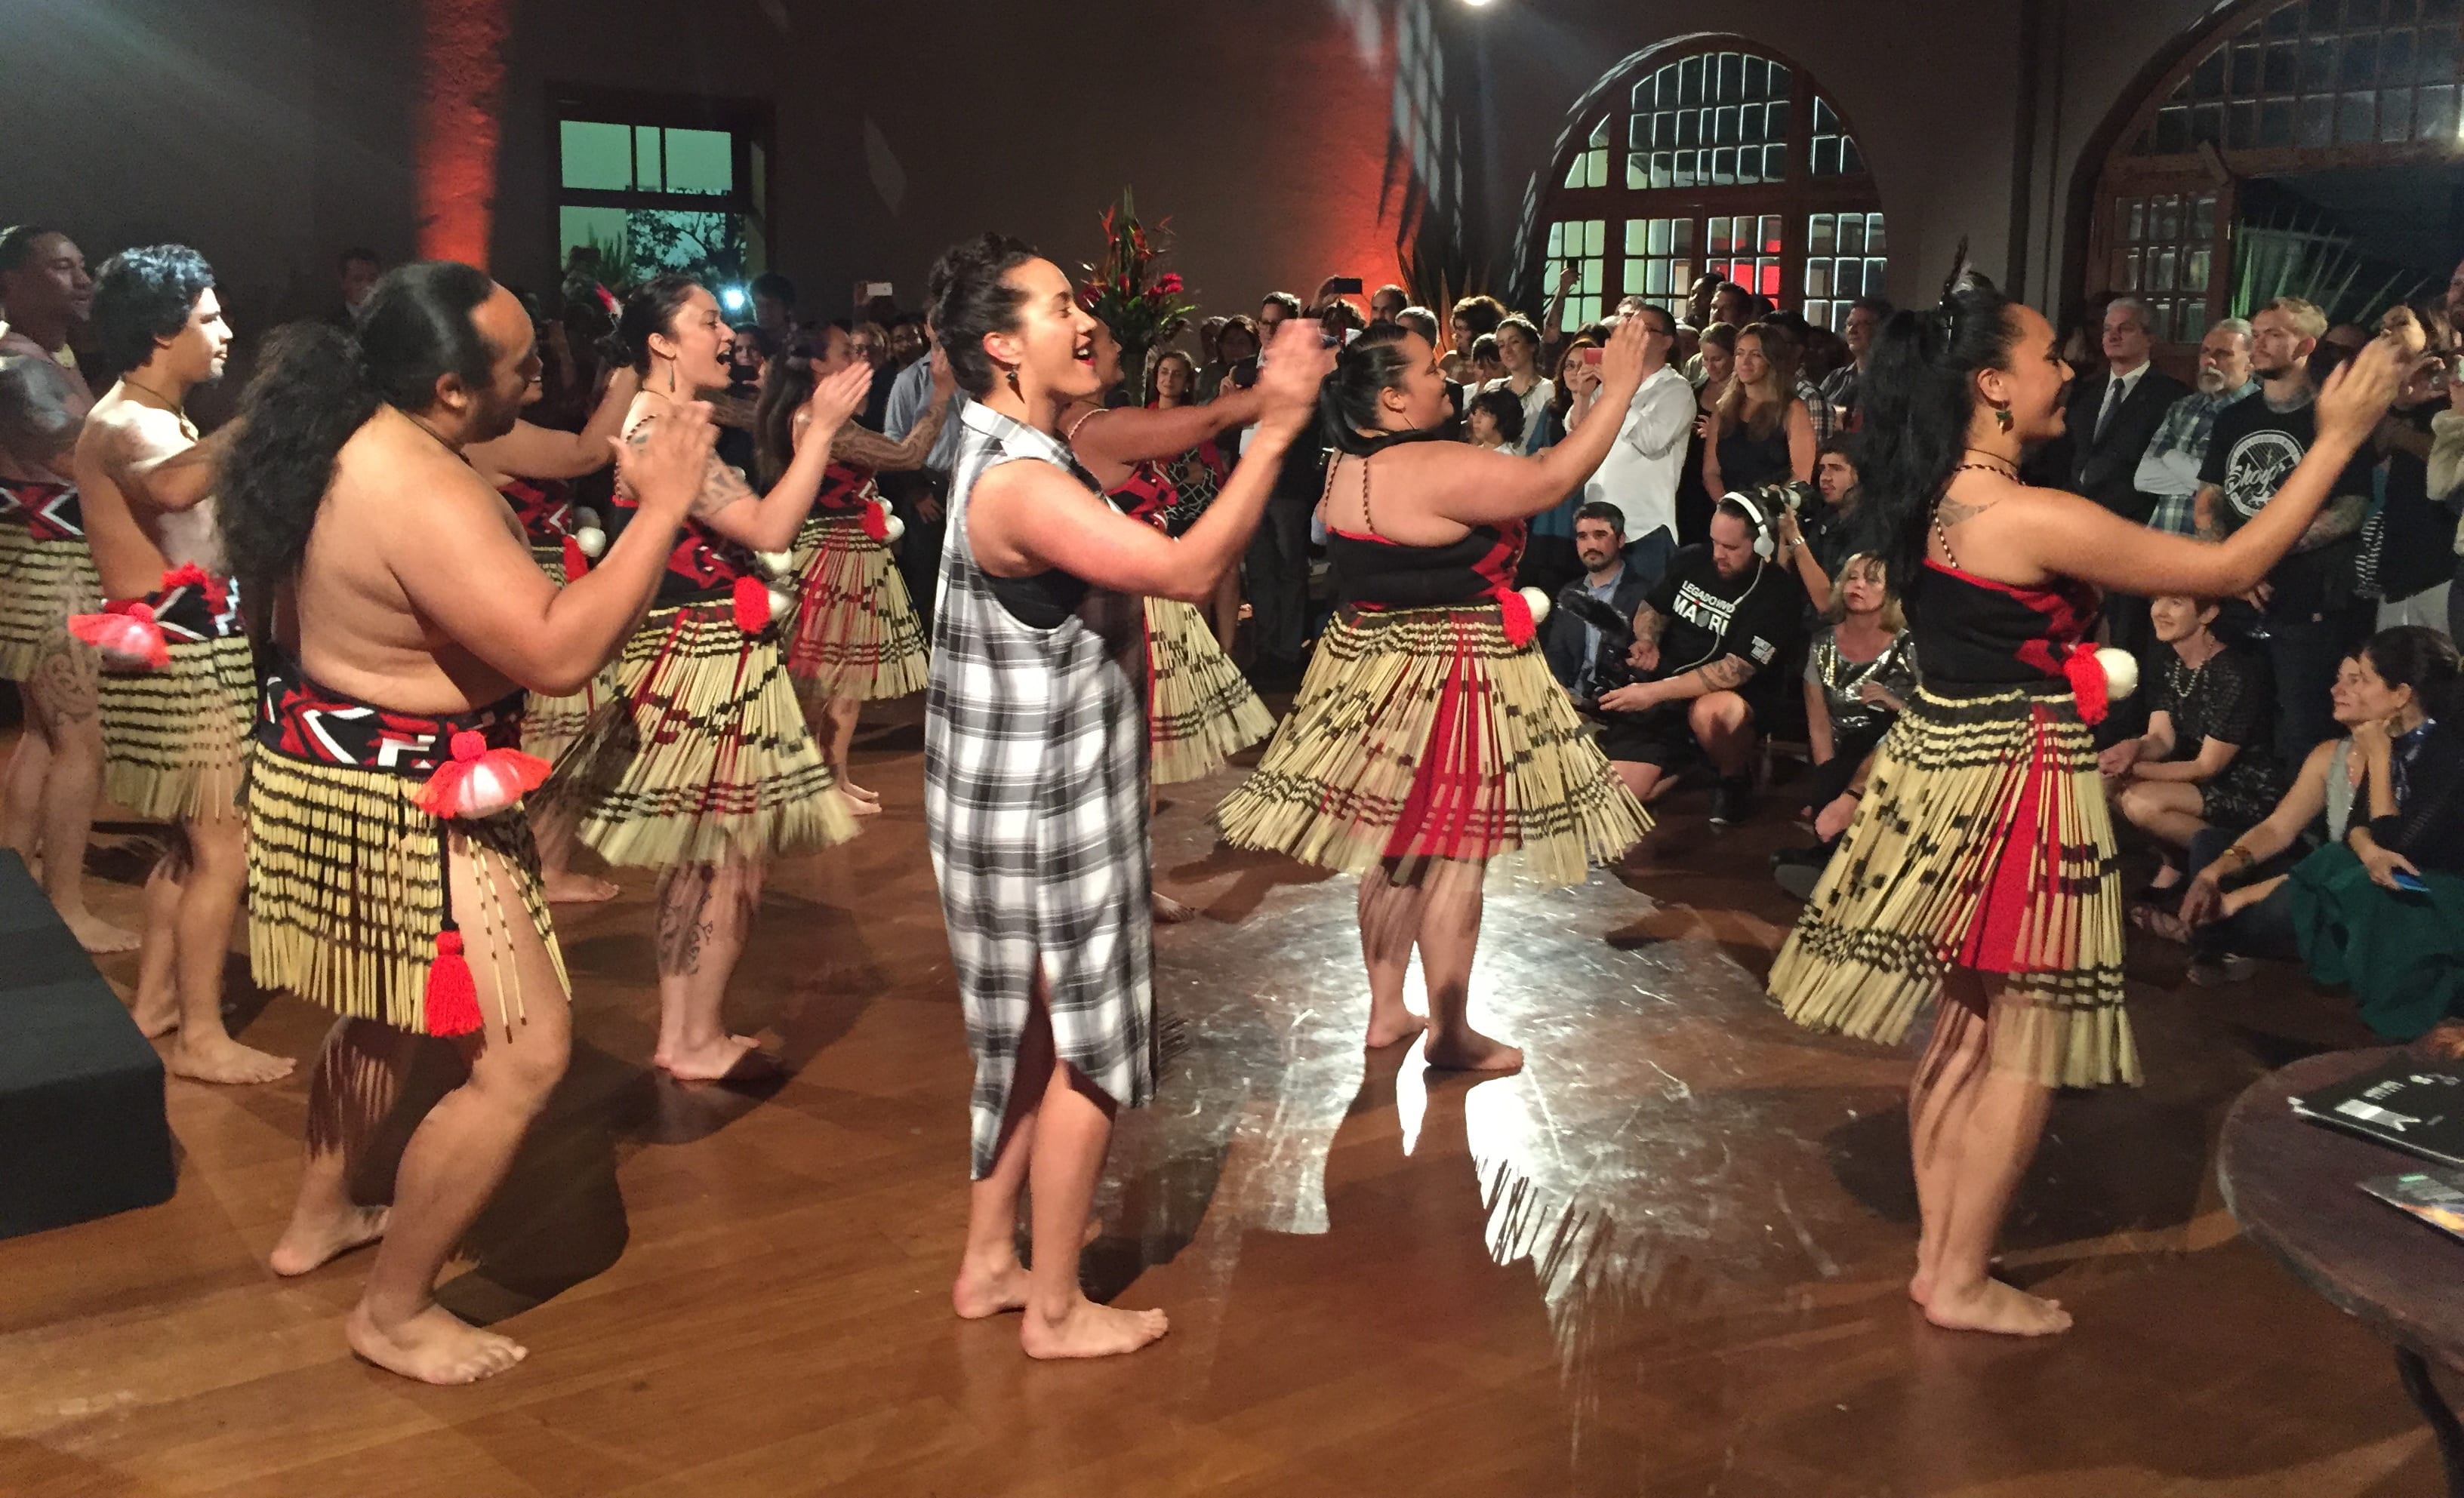 New Zealand songstress Ria Hall (in black and white dress) joins the New Zealand Maori Arts and Crafts Institute | Nga Kete Tuku Iho Kapa Haka group at the official opening of the Tuku Iho Exhibition in Rio de Janeiro